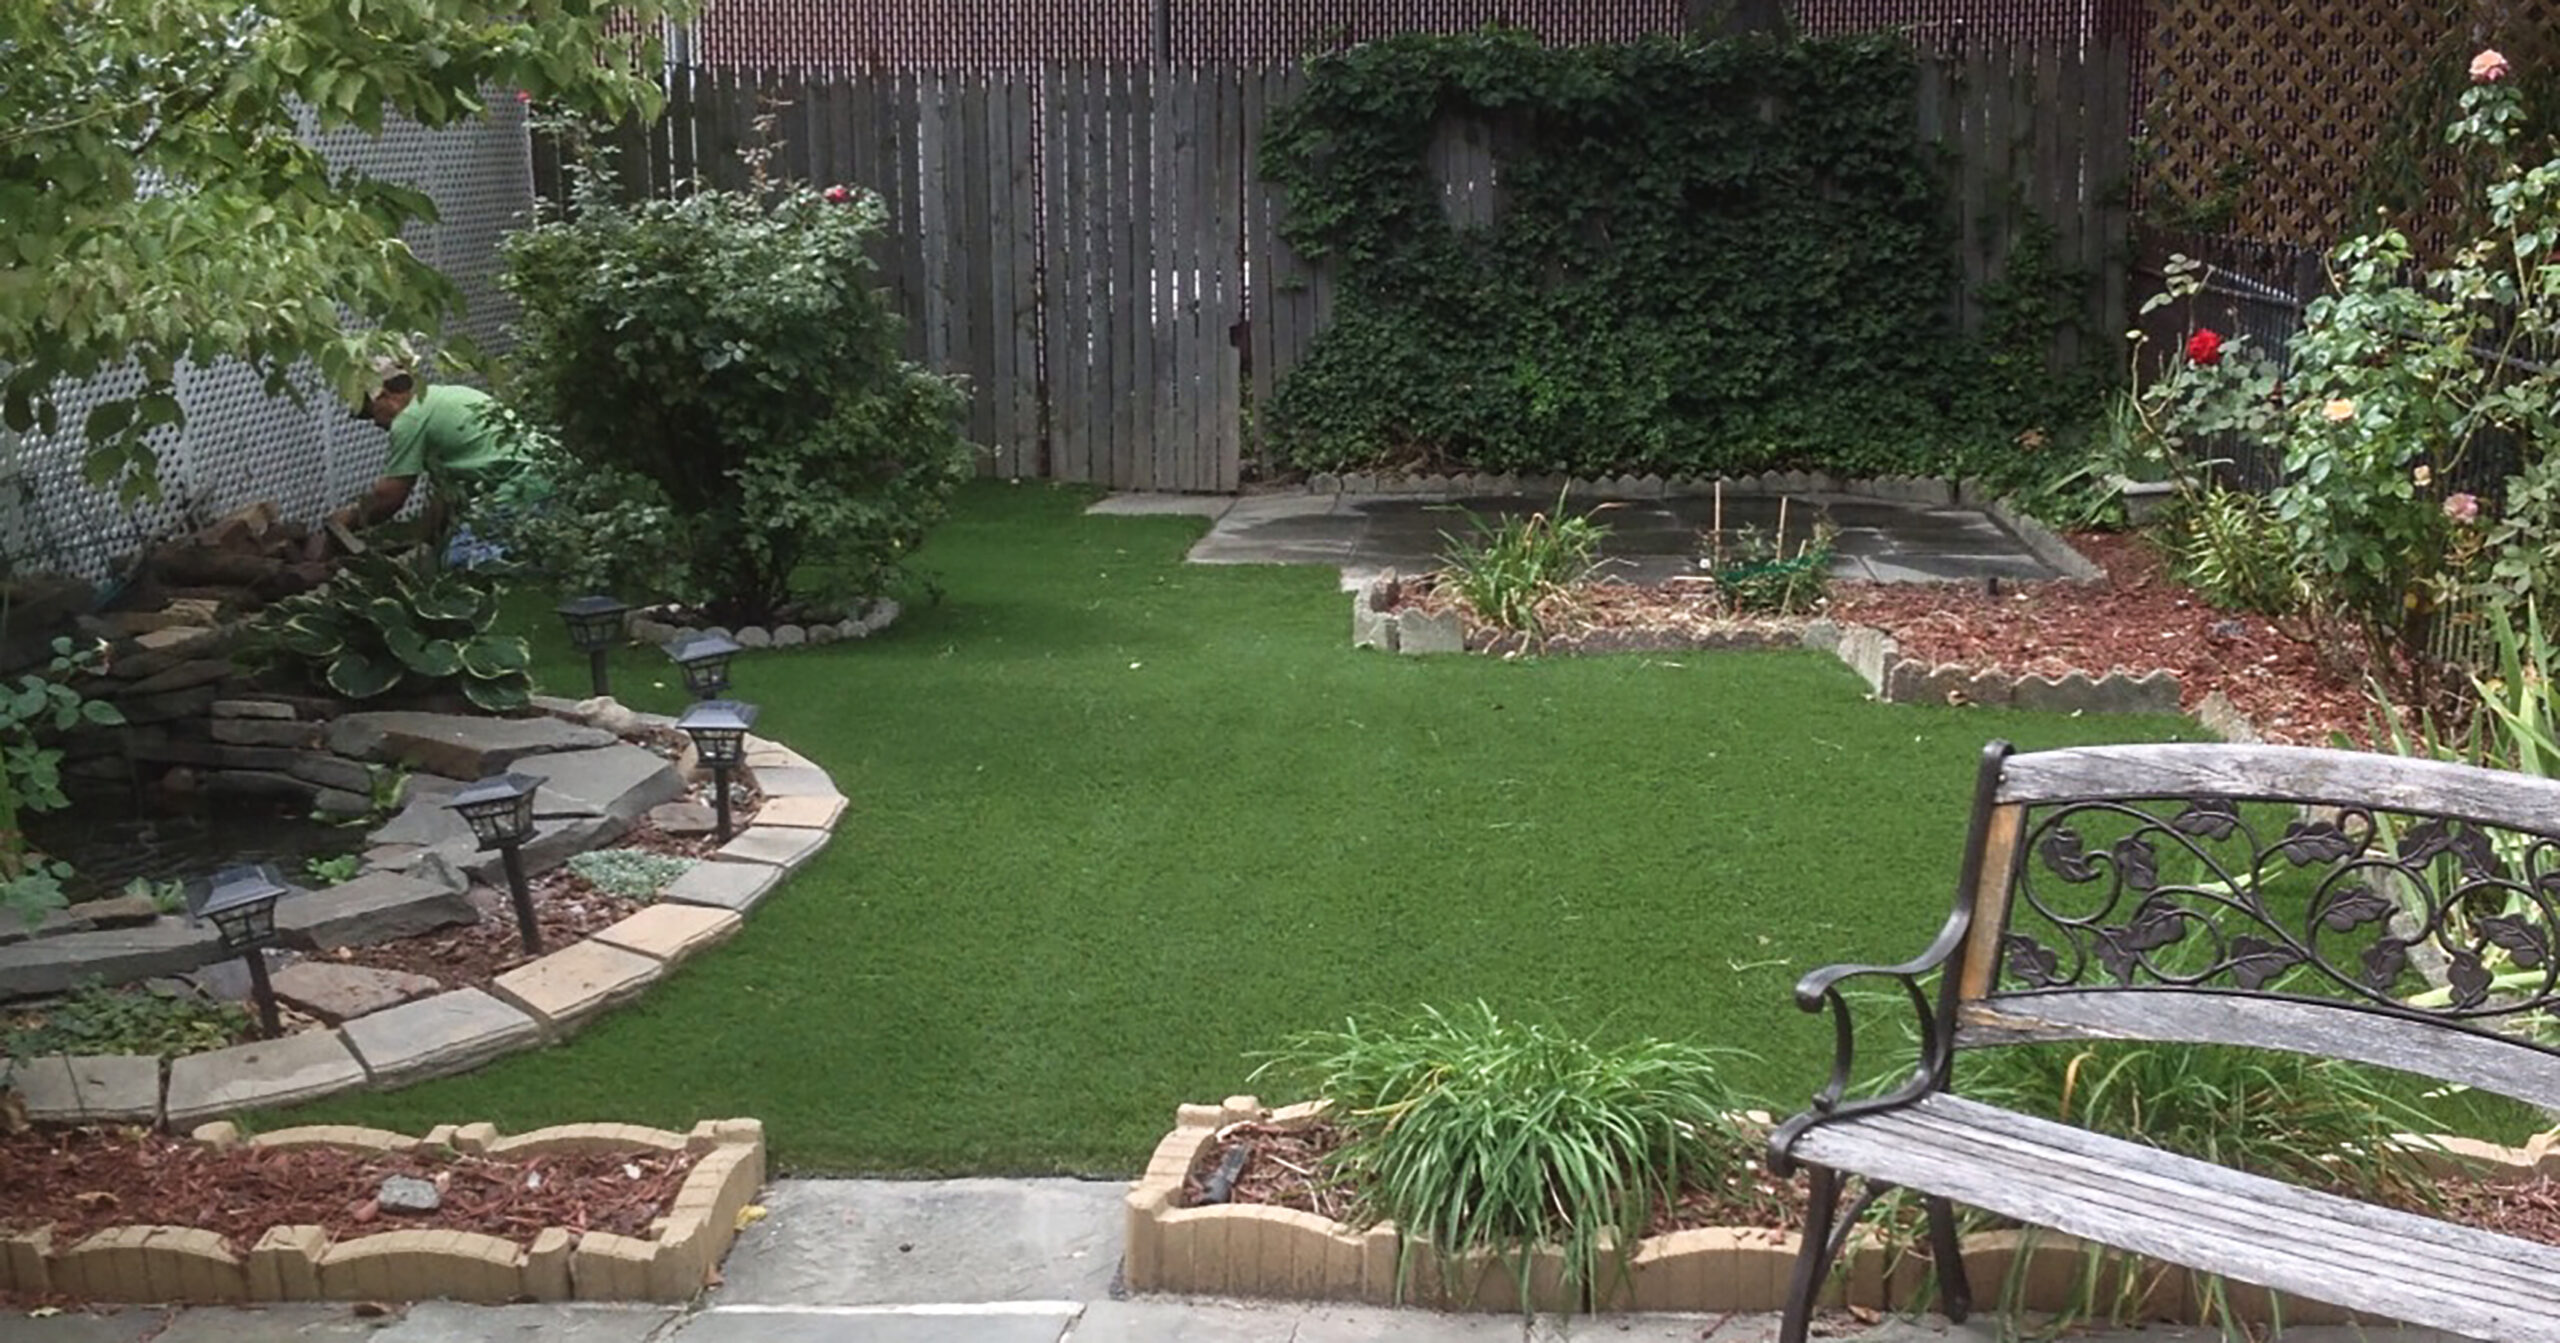 fake grass turf for homes